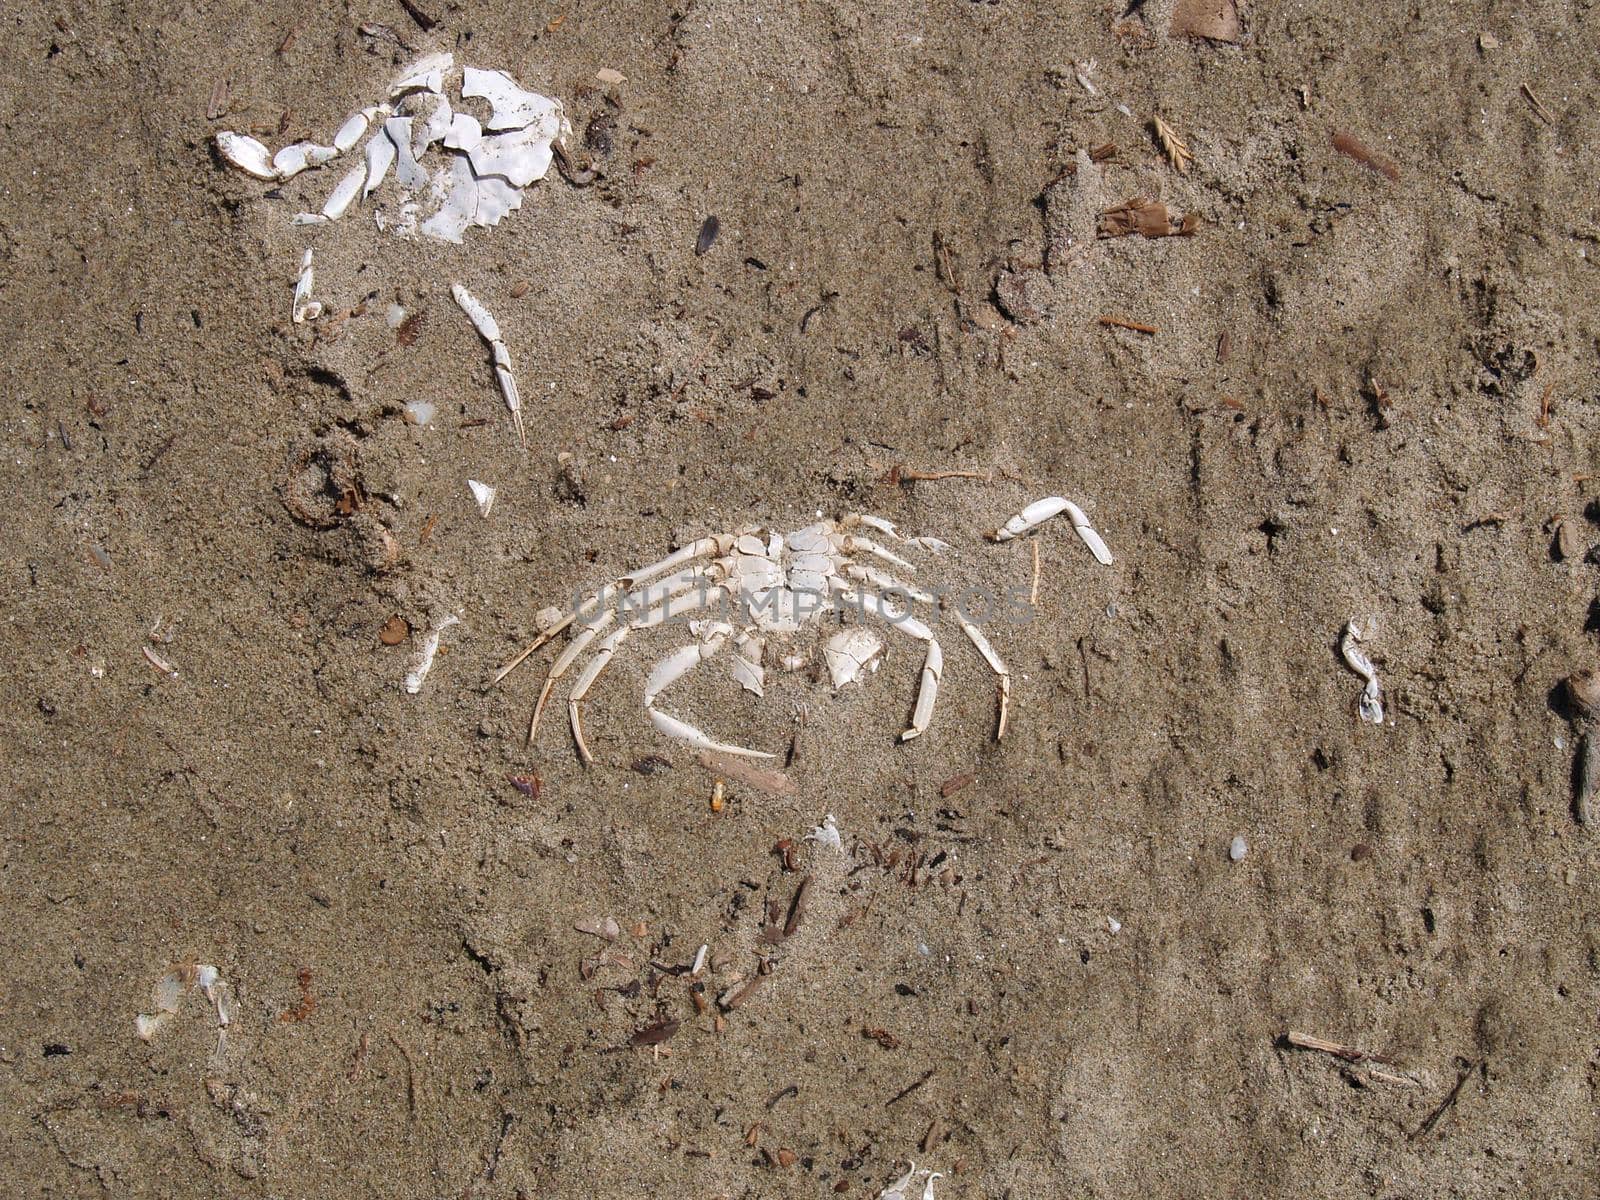 White crab skeleton in the sand. The shell of a dead crab.